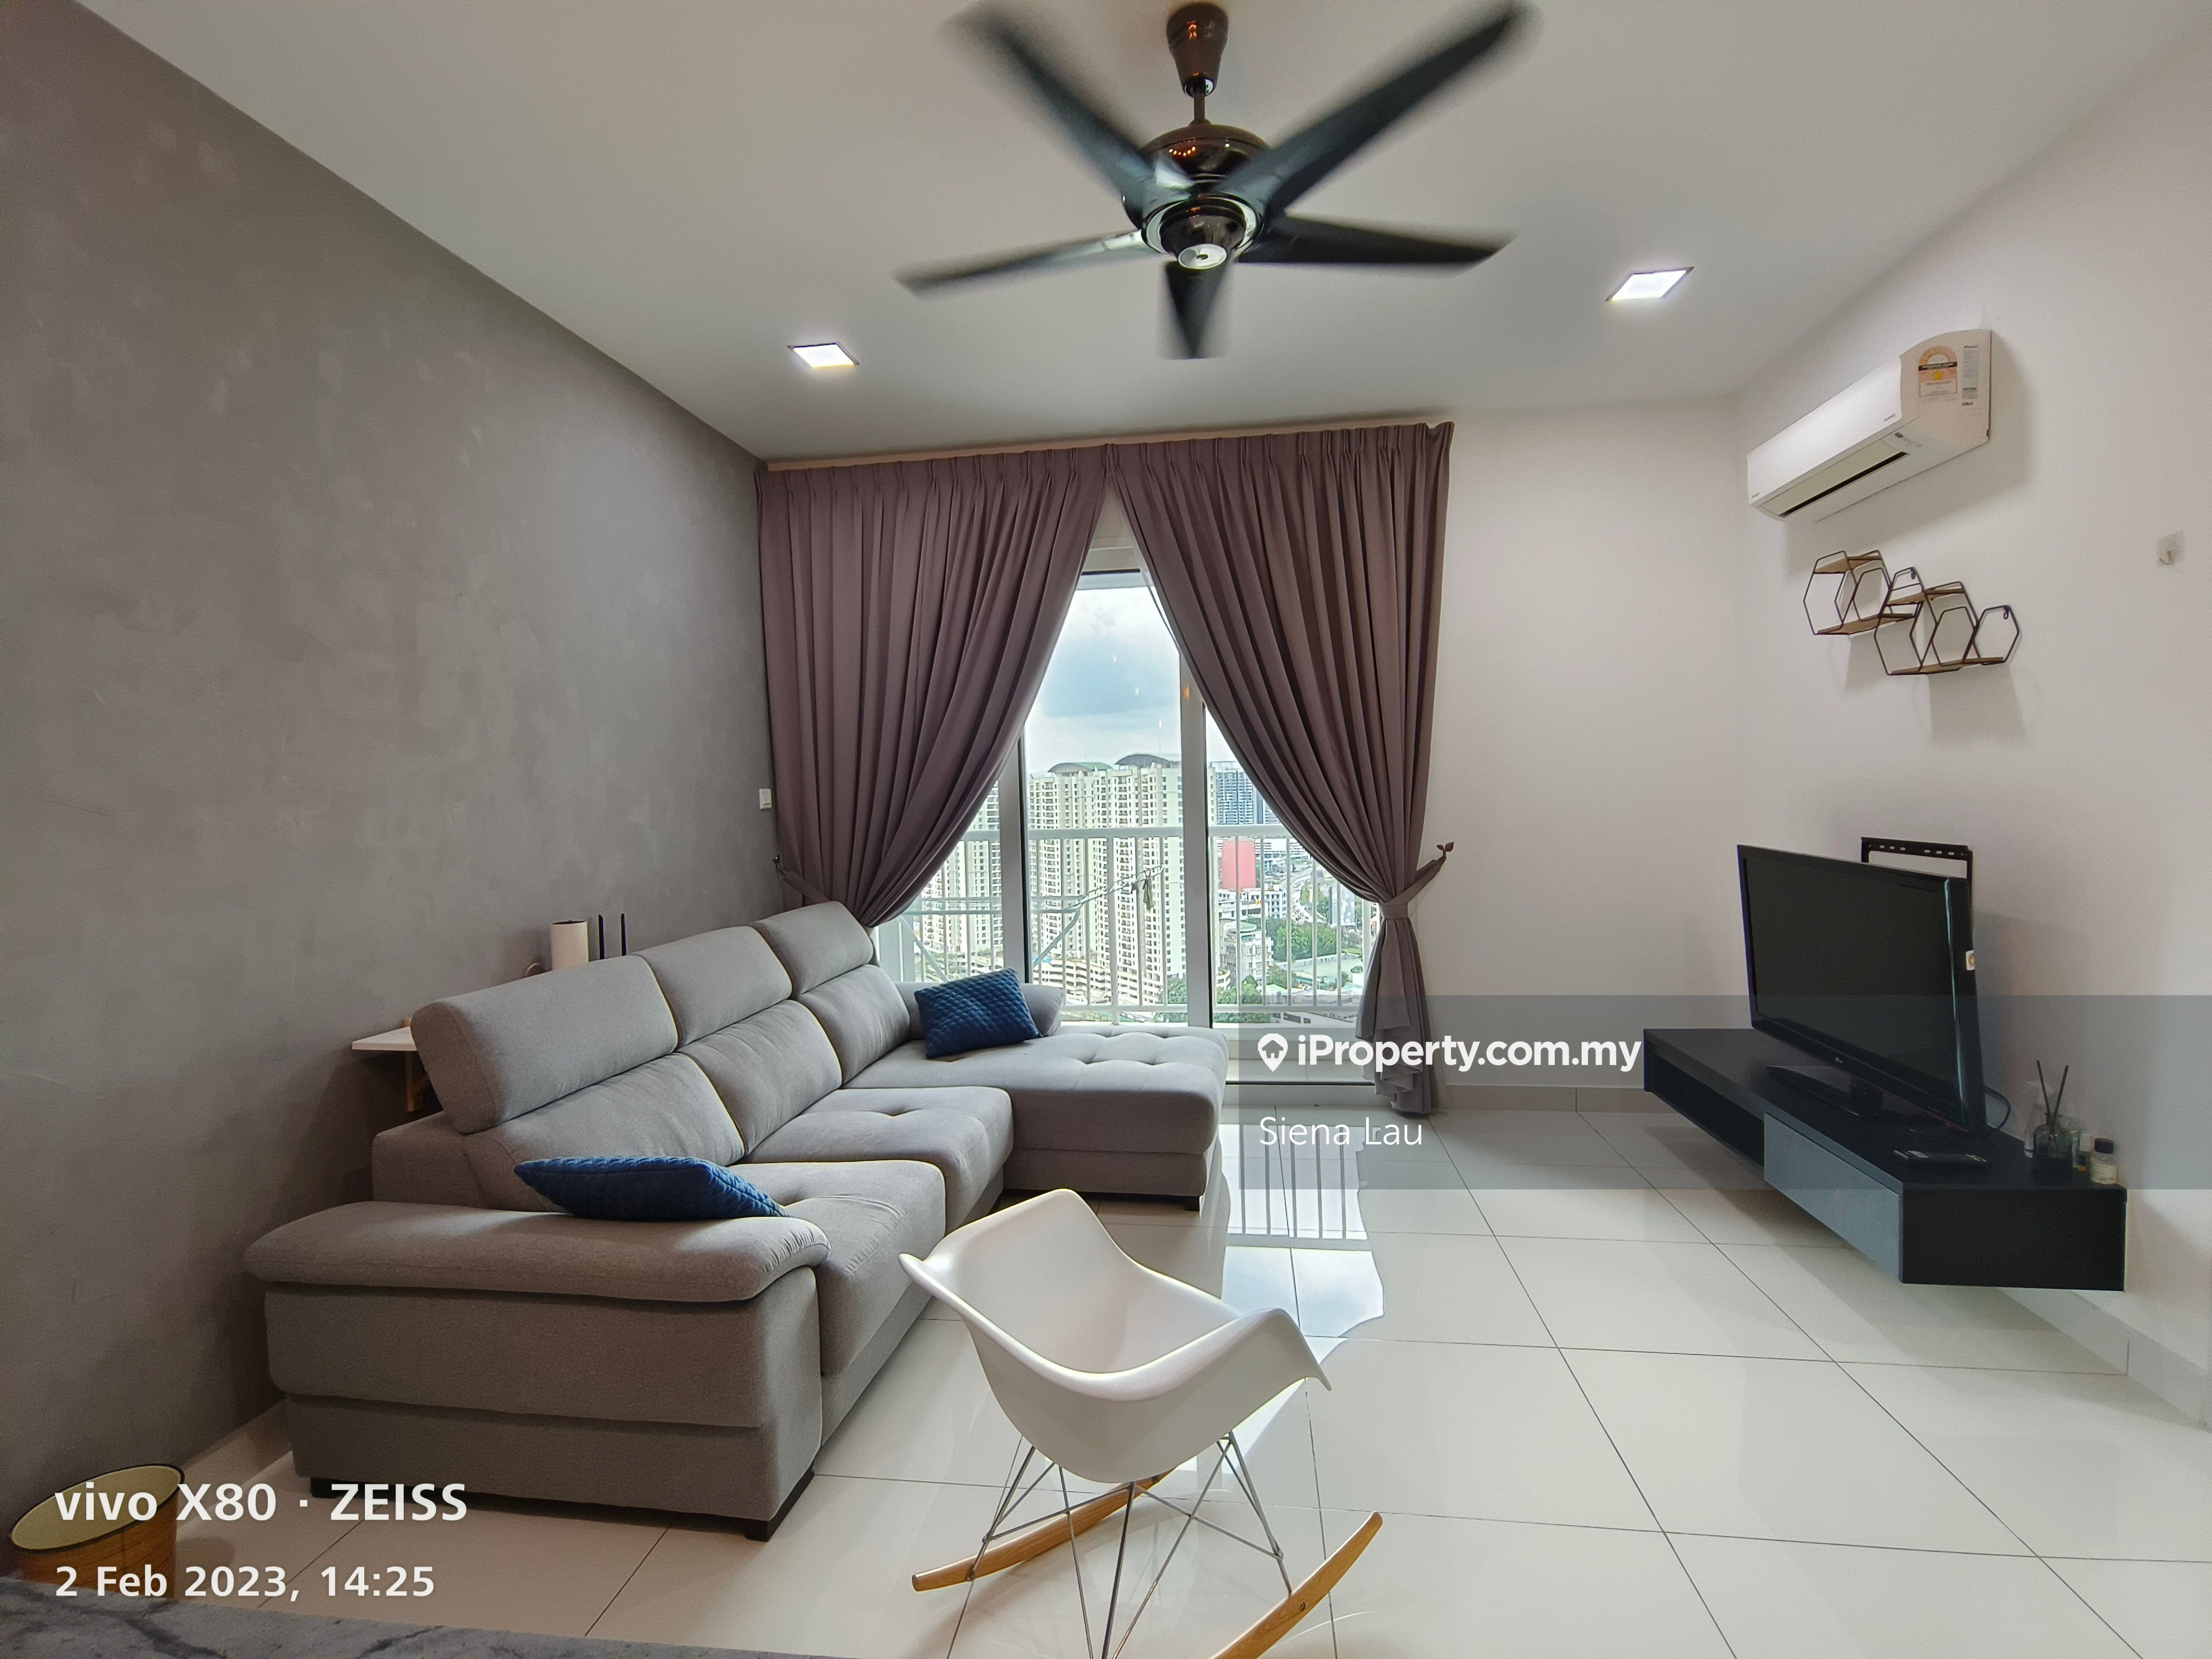 Court 28 Serviced Residence 3 bedrooms for rent in Jalan Ipoh, Kuala ...